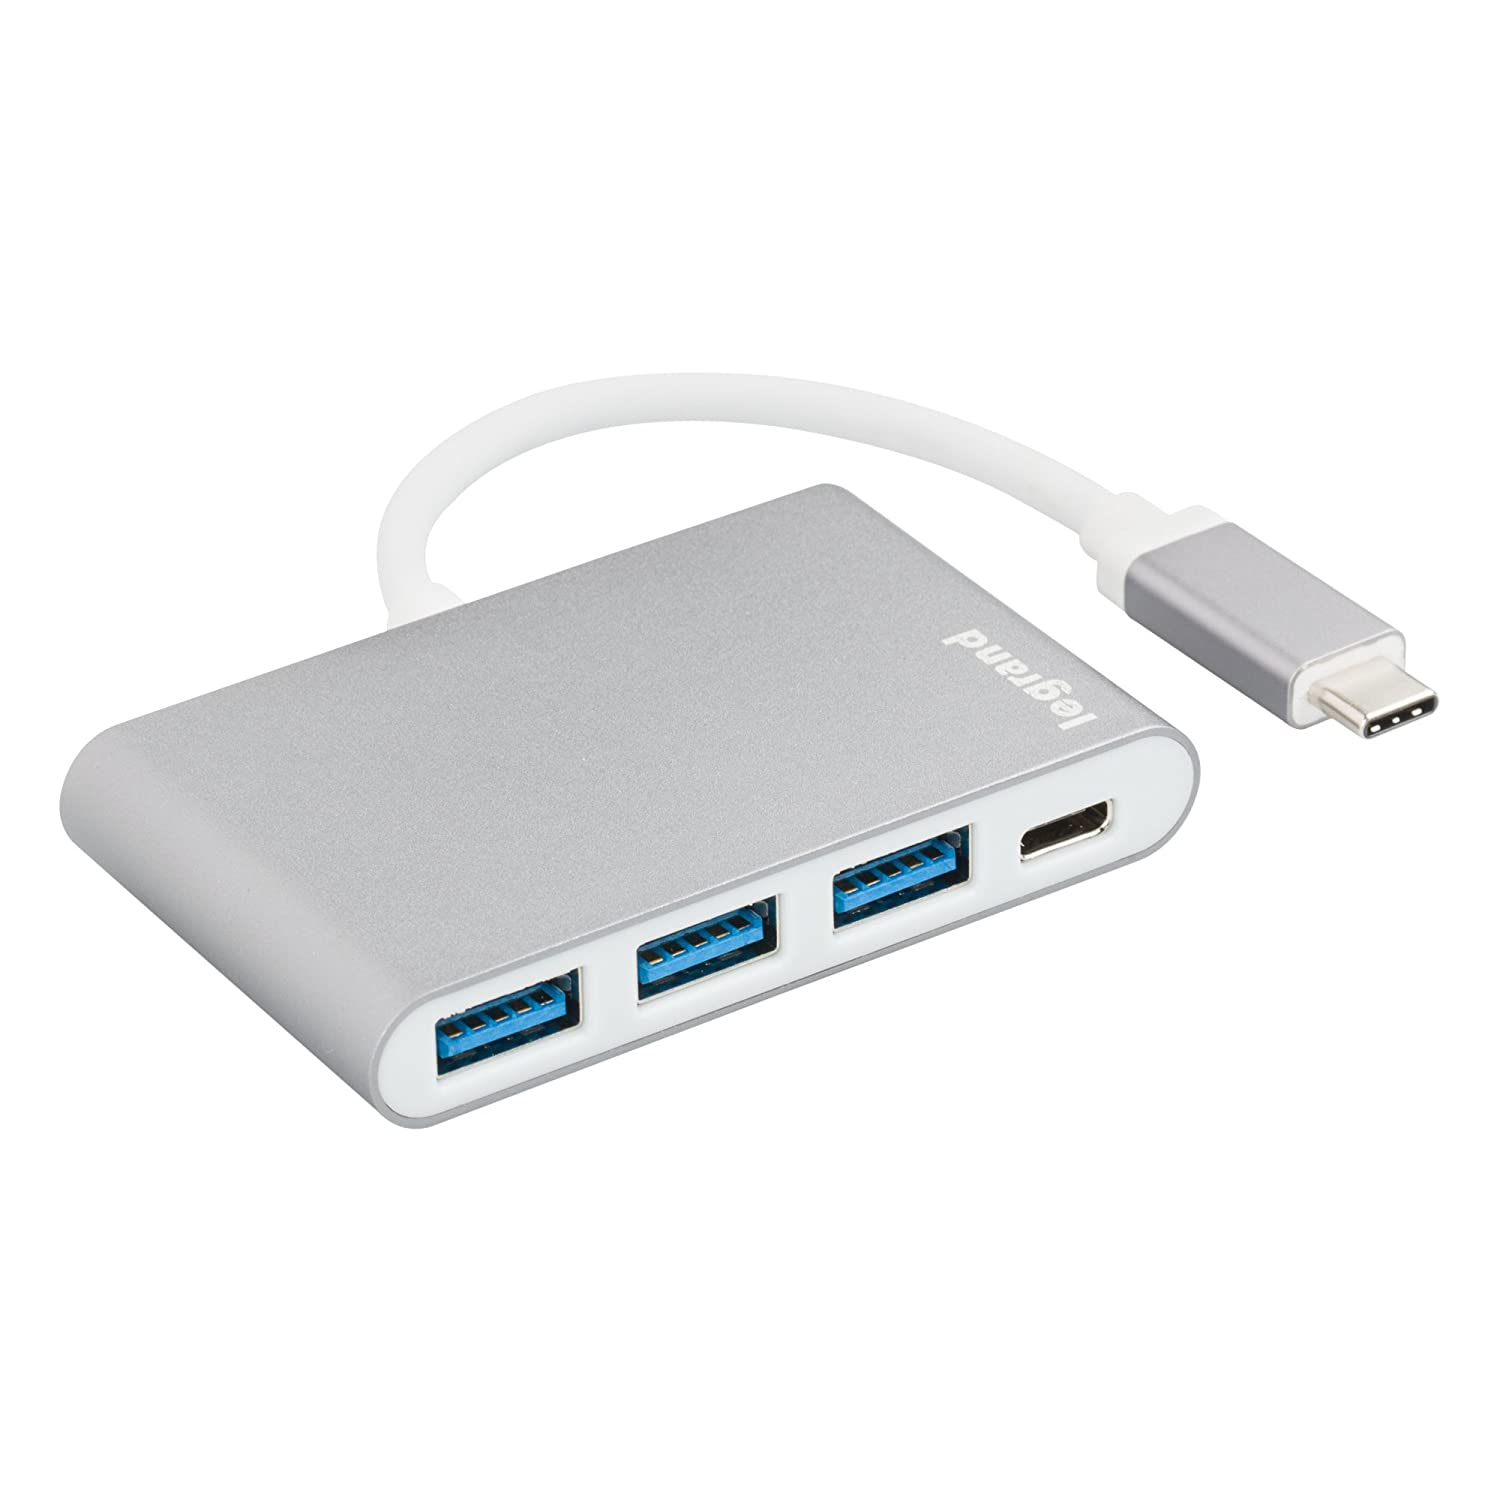 USB HUB Type C to 3 USB Type A and 1 USB Type C